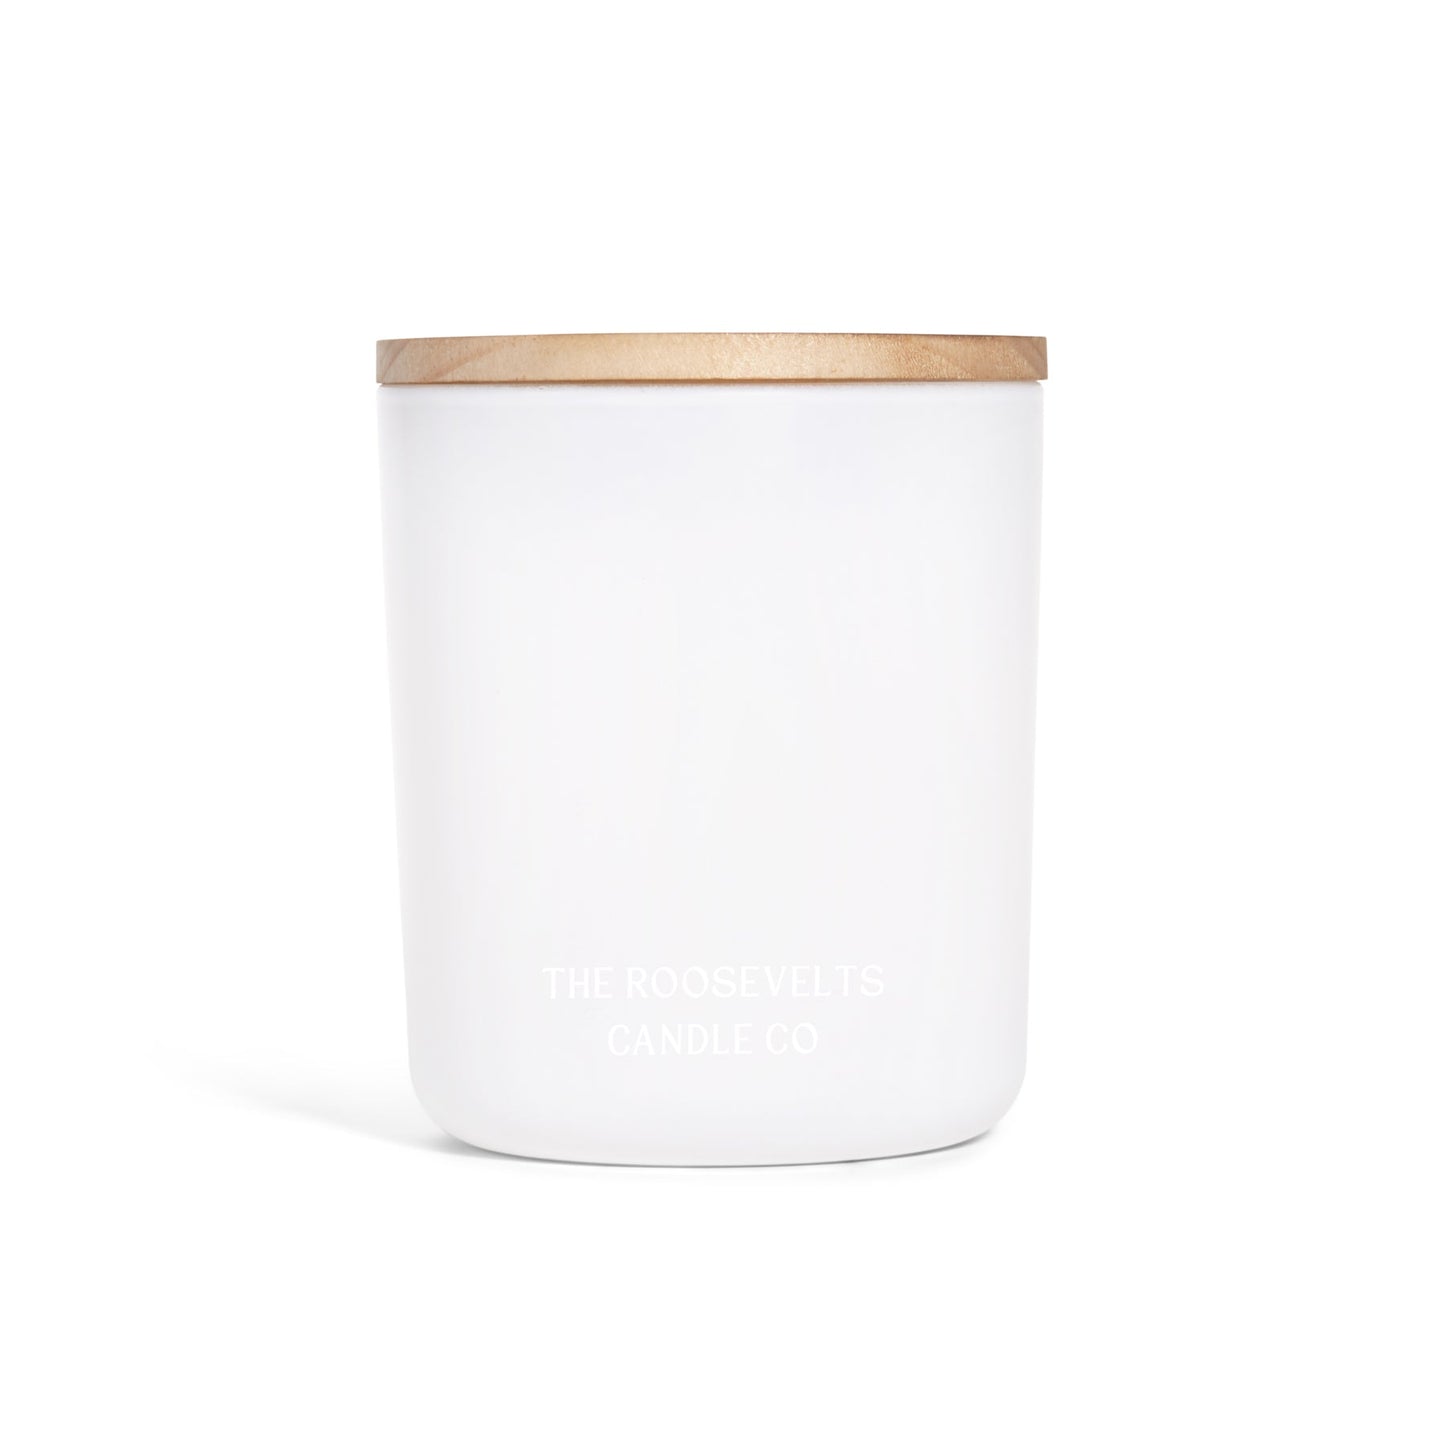 Smoky Mtn Candle - Musk, Santal, Papyrus & Cardamom - The Roosevelts Candle Co.